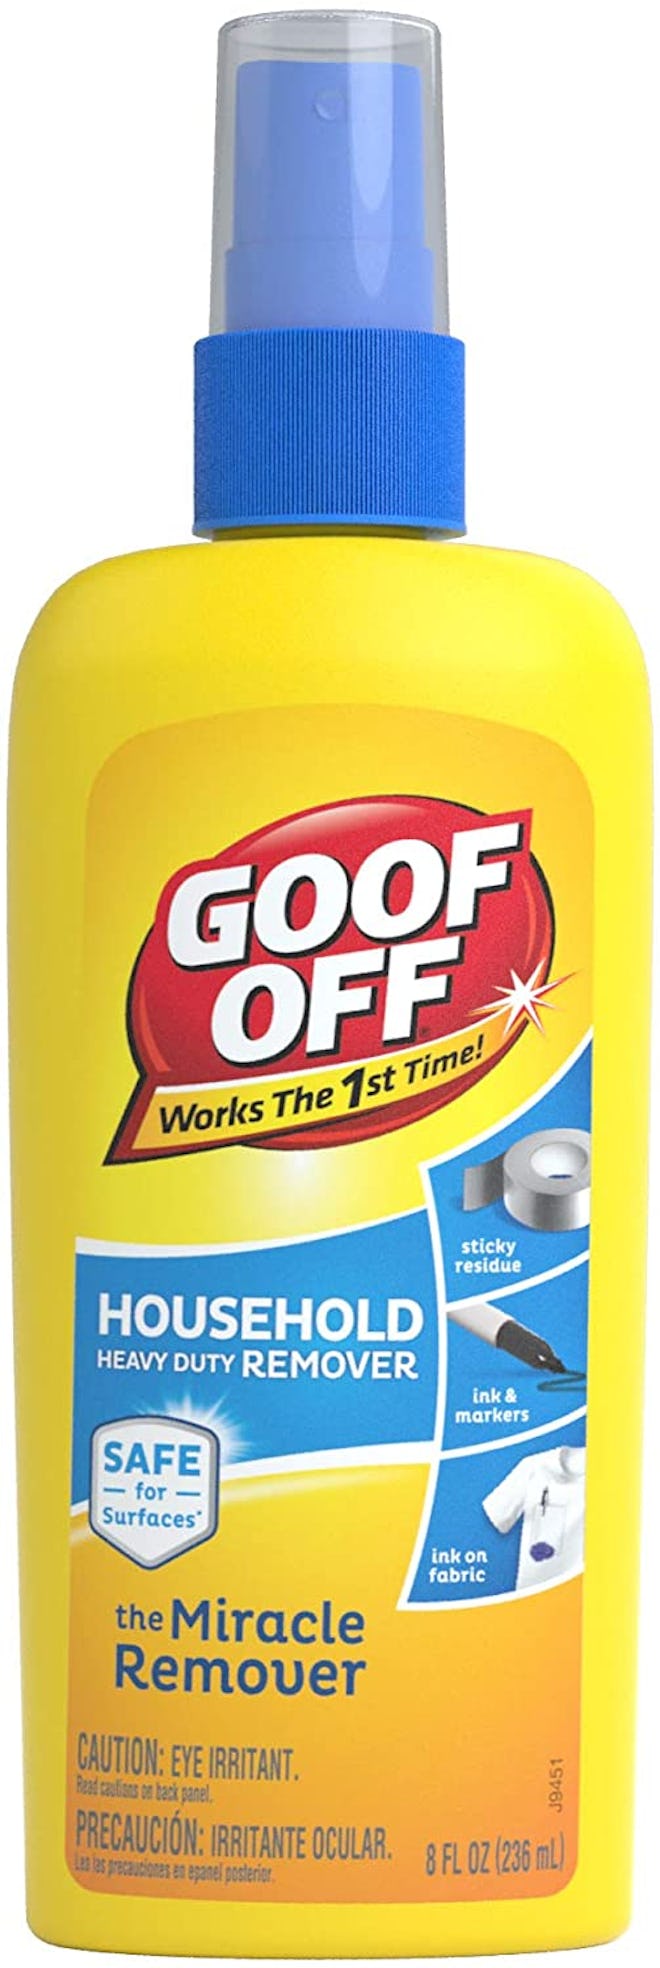 Goof Off Household Heavy Duty Remover for Spots